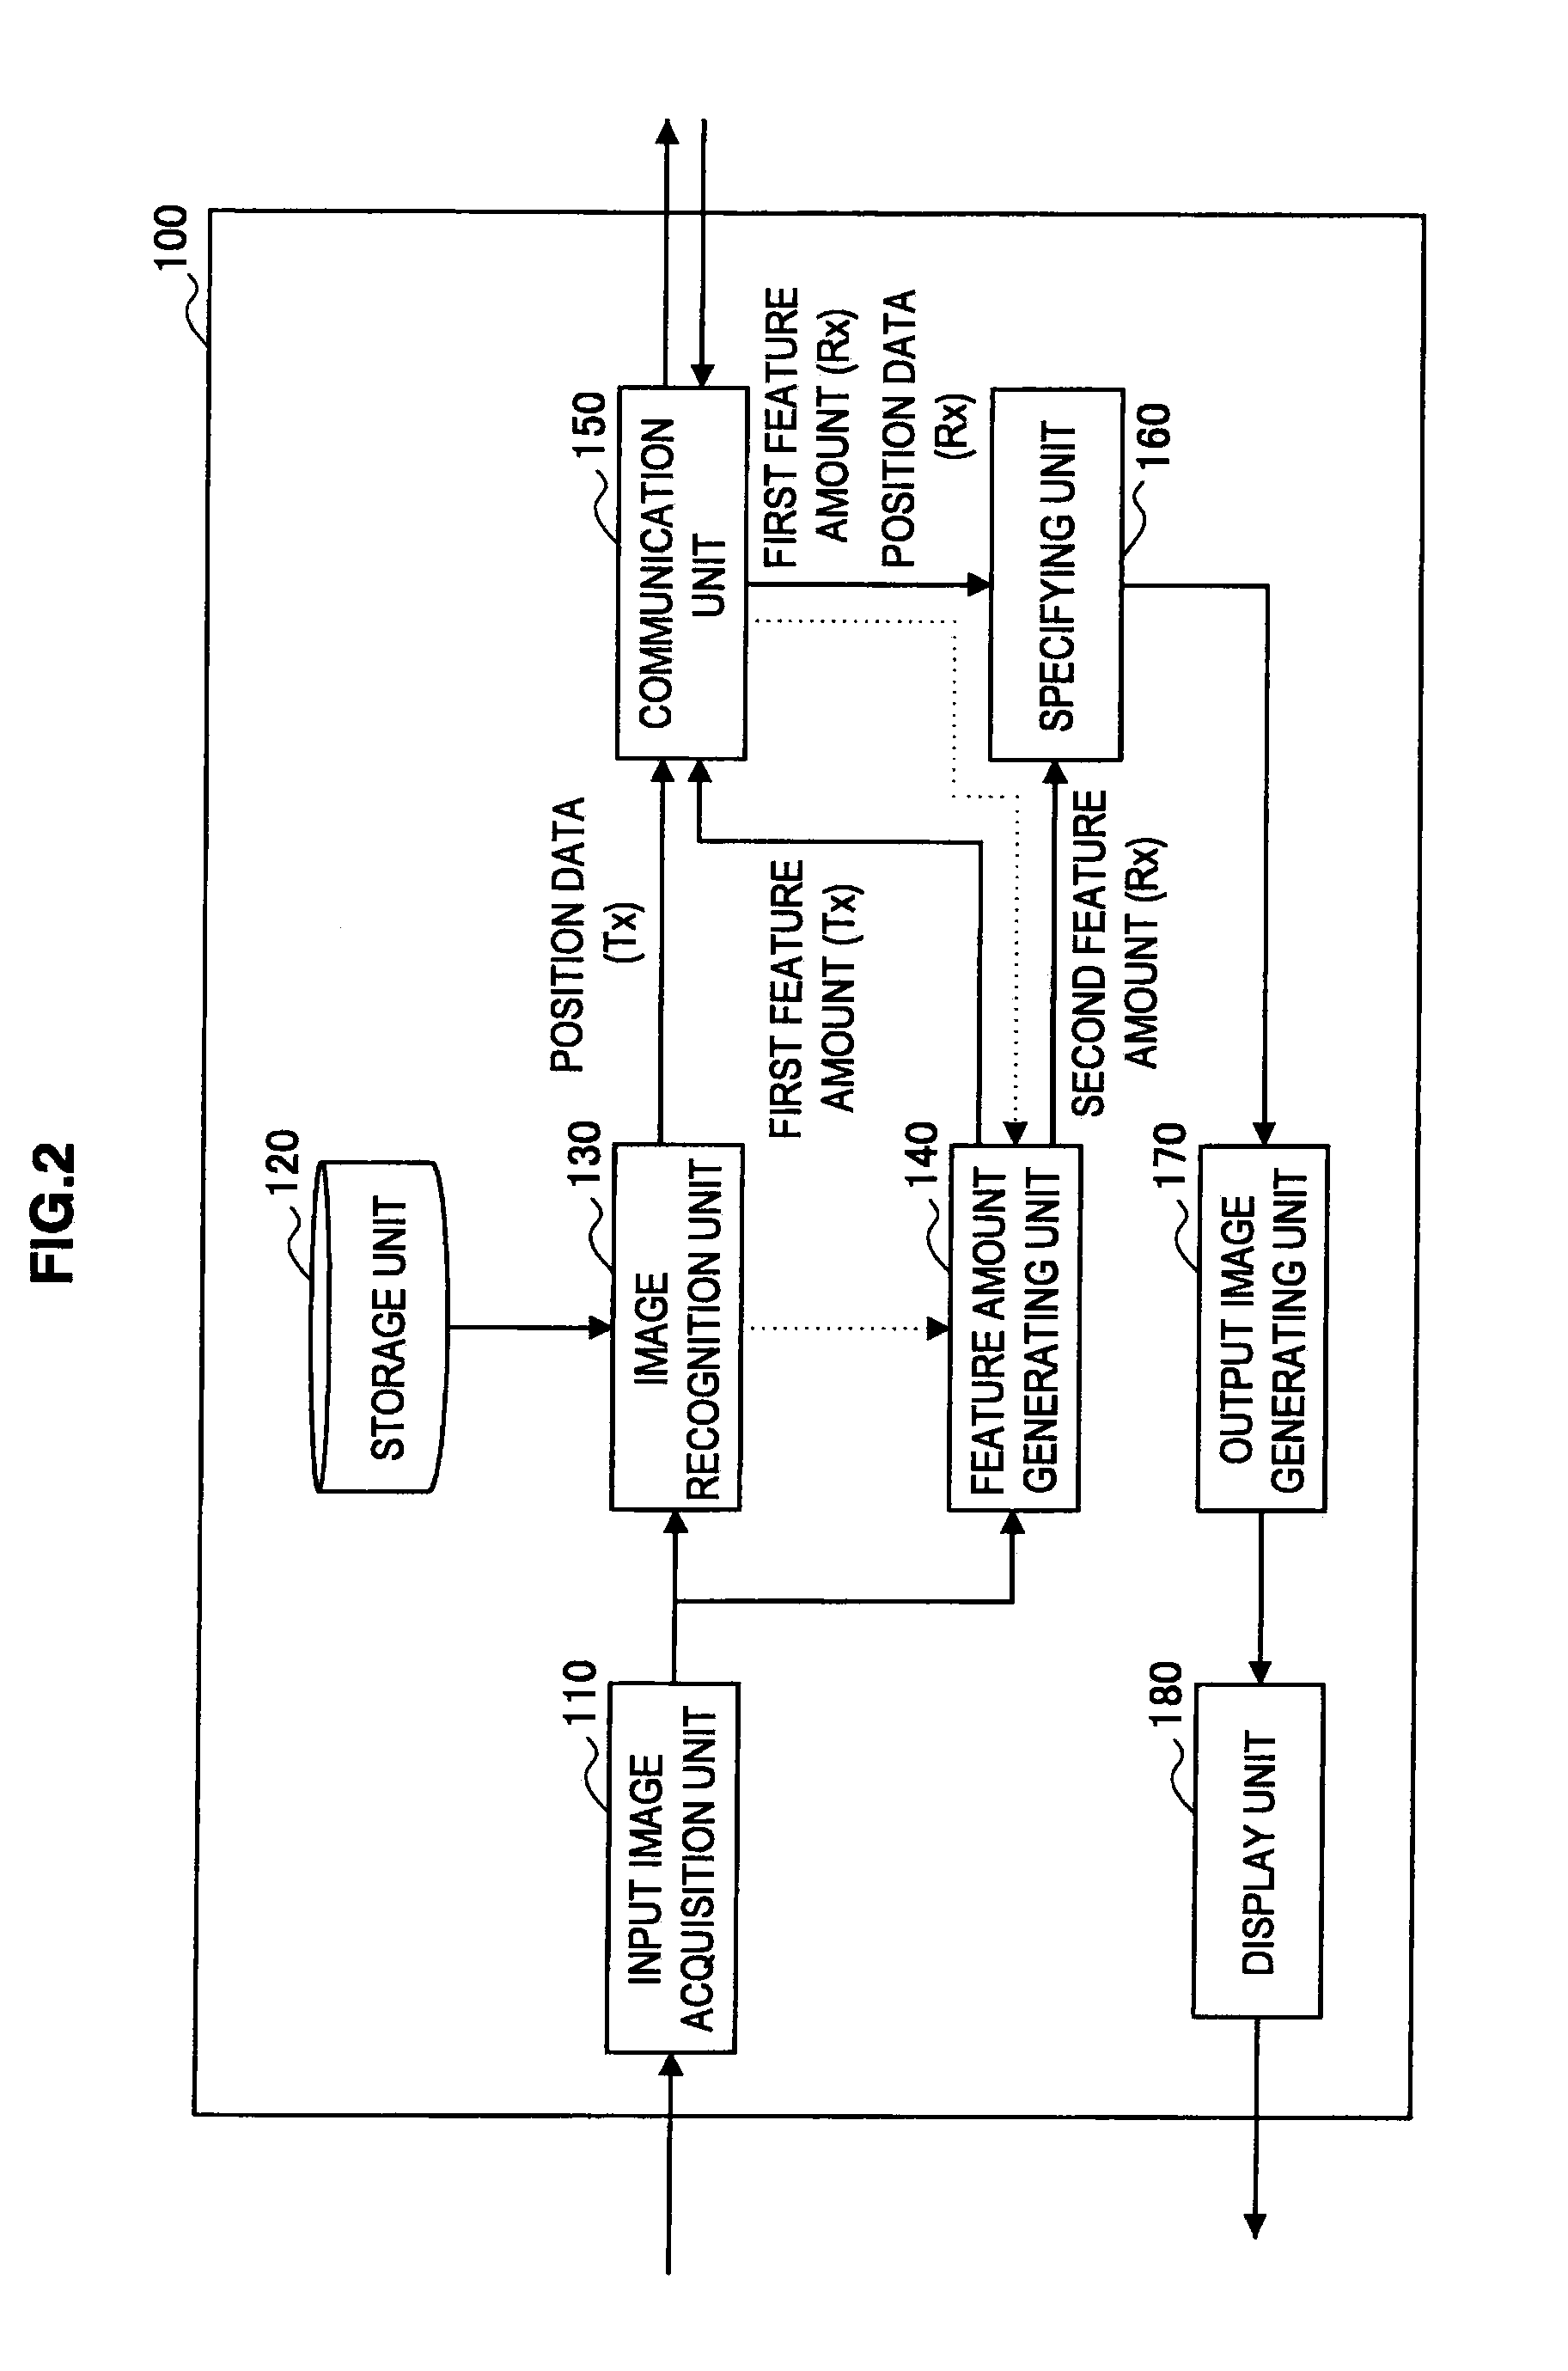 Image processing system, image processing apparatus, image processing method, and program